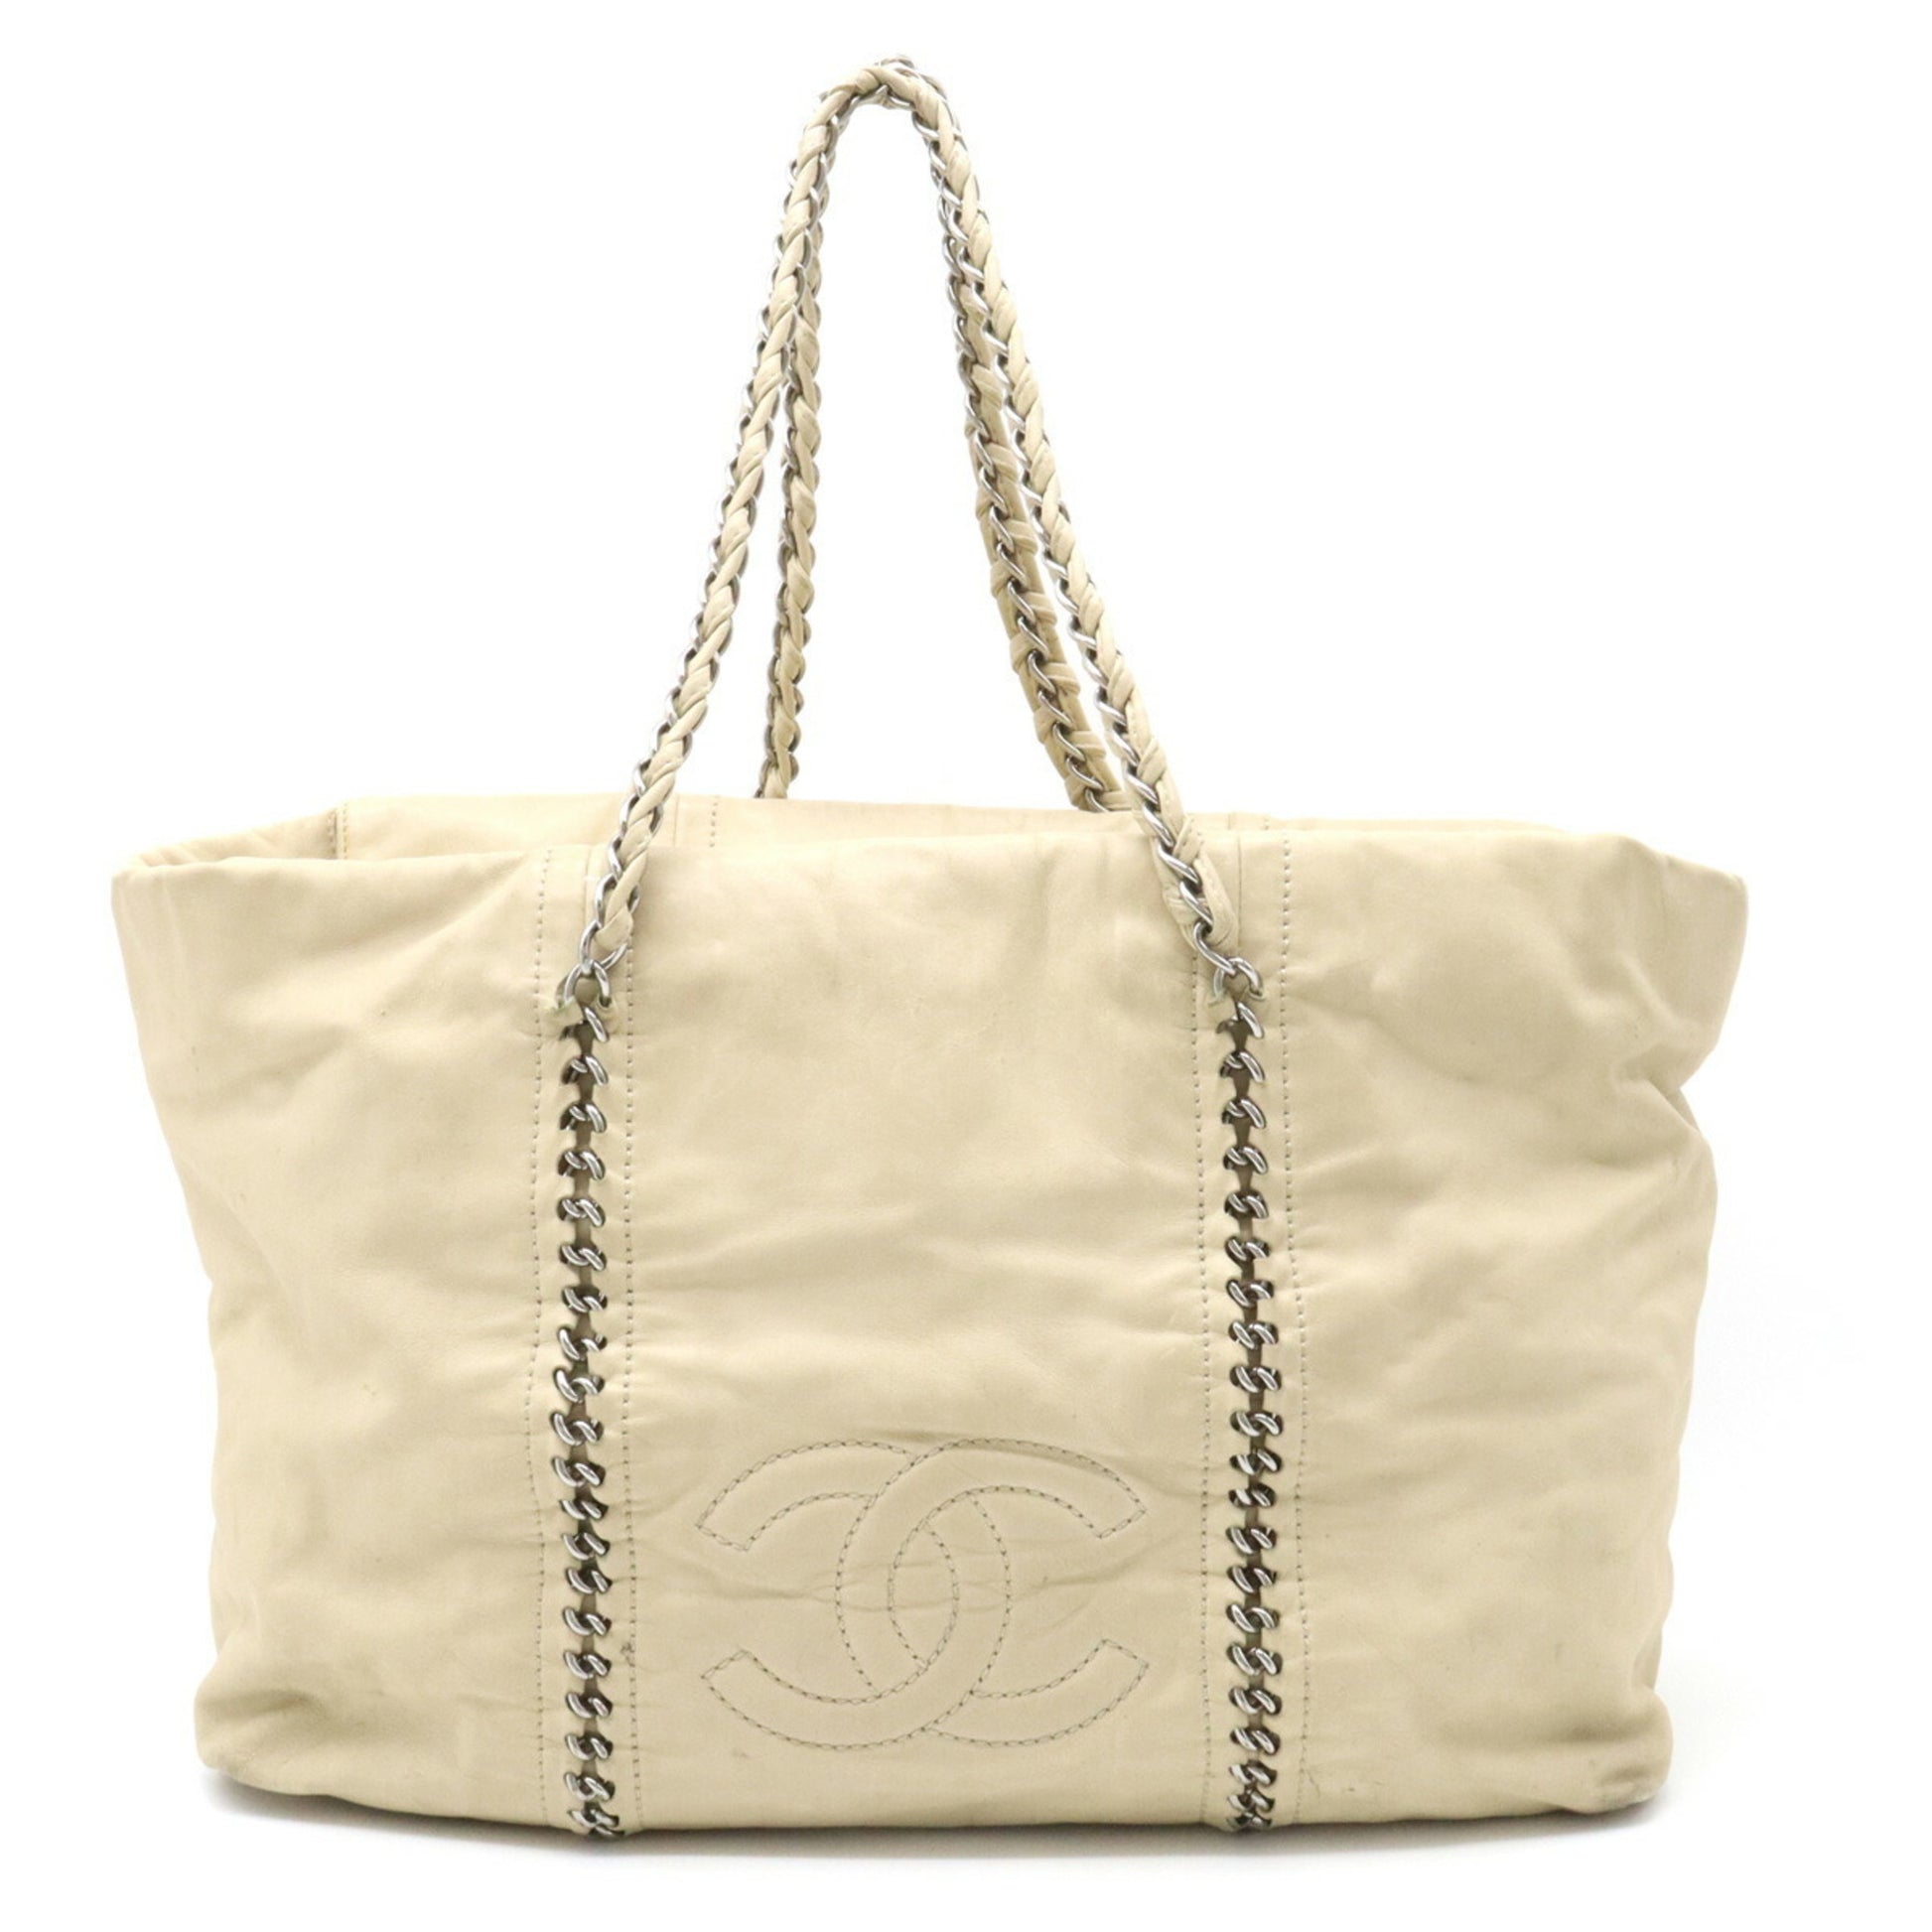 CHANEL Chanel luxury line chain bag beige A31574 ladies leather